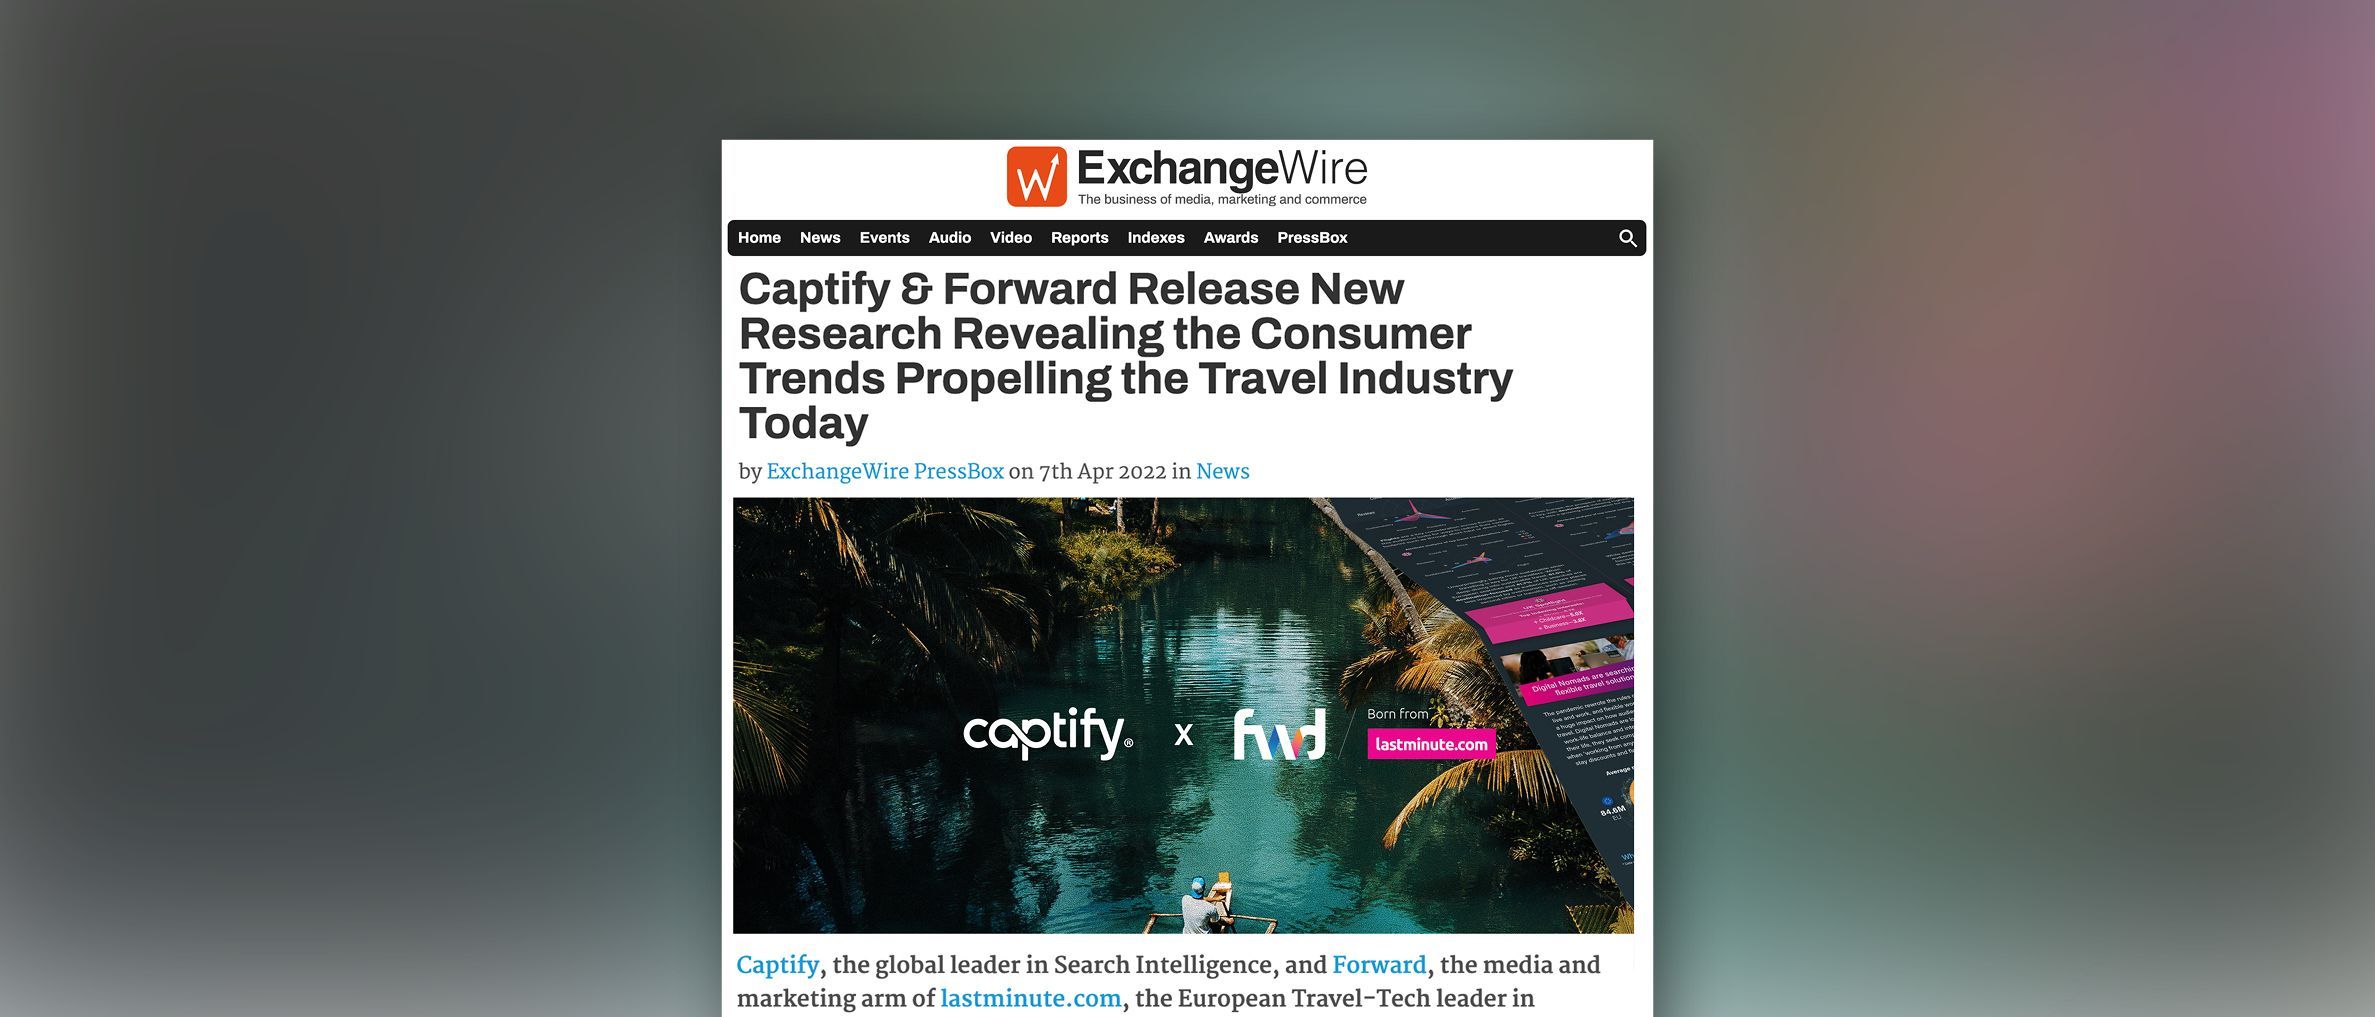 ExchangeWire: Captify & Forward Release New Research Revealing the Consumer Trends Propelling the Travel Industry Today